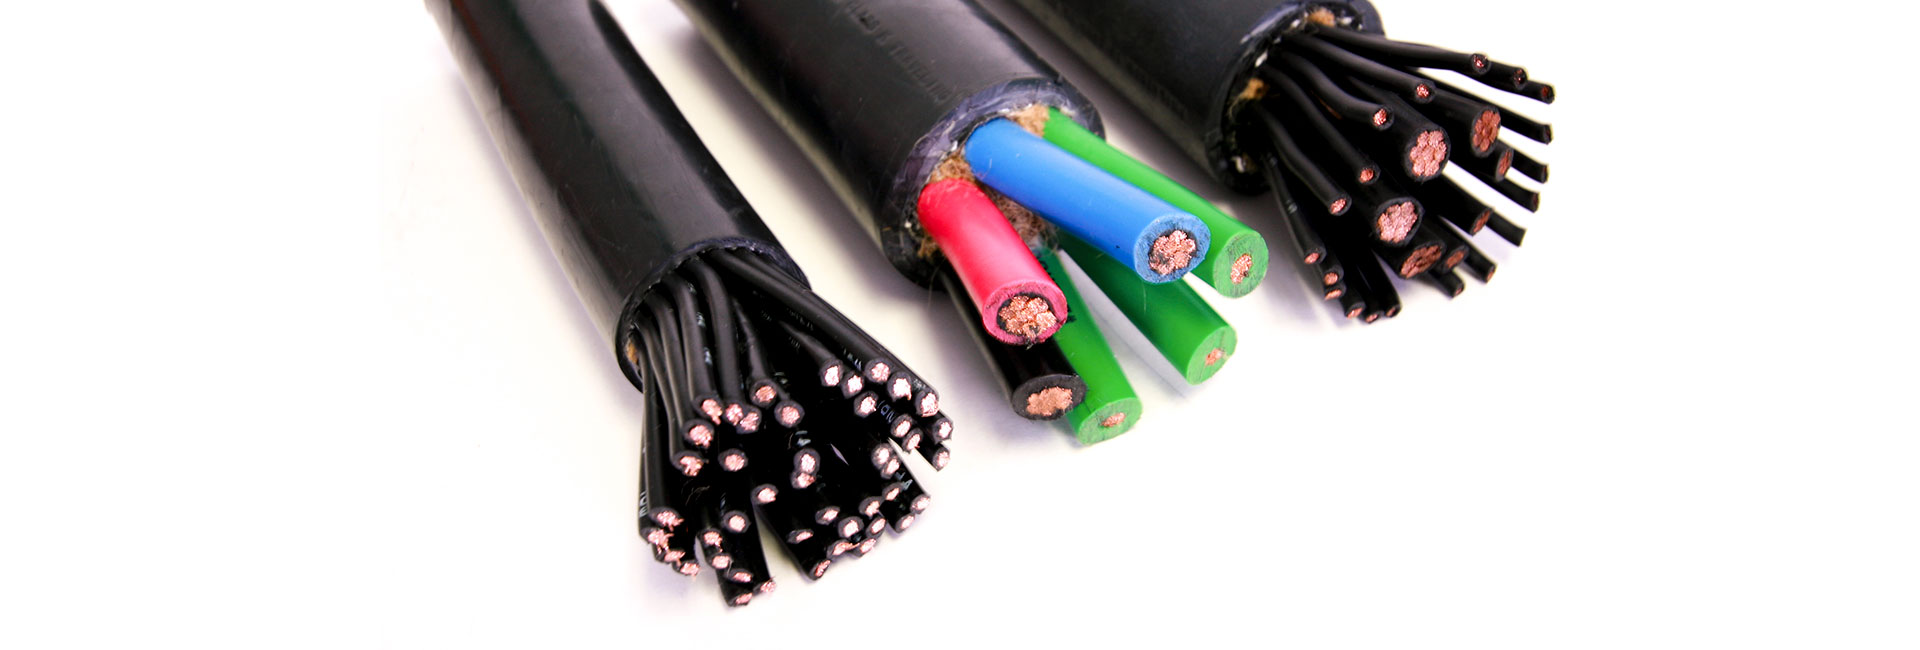 Custom Elctrical Cables USA Manufactured